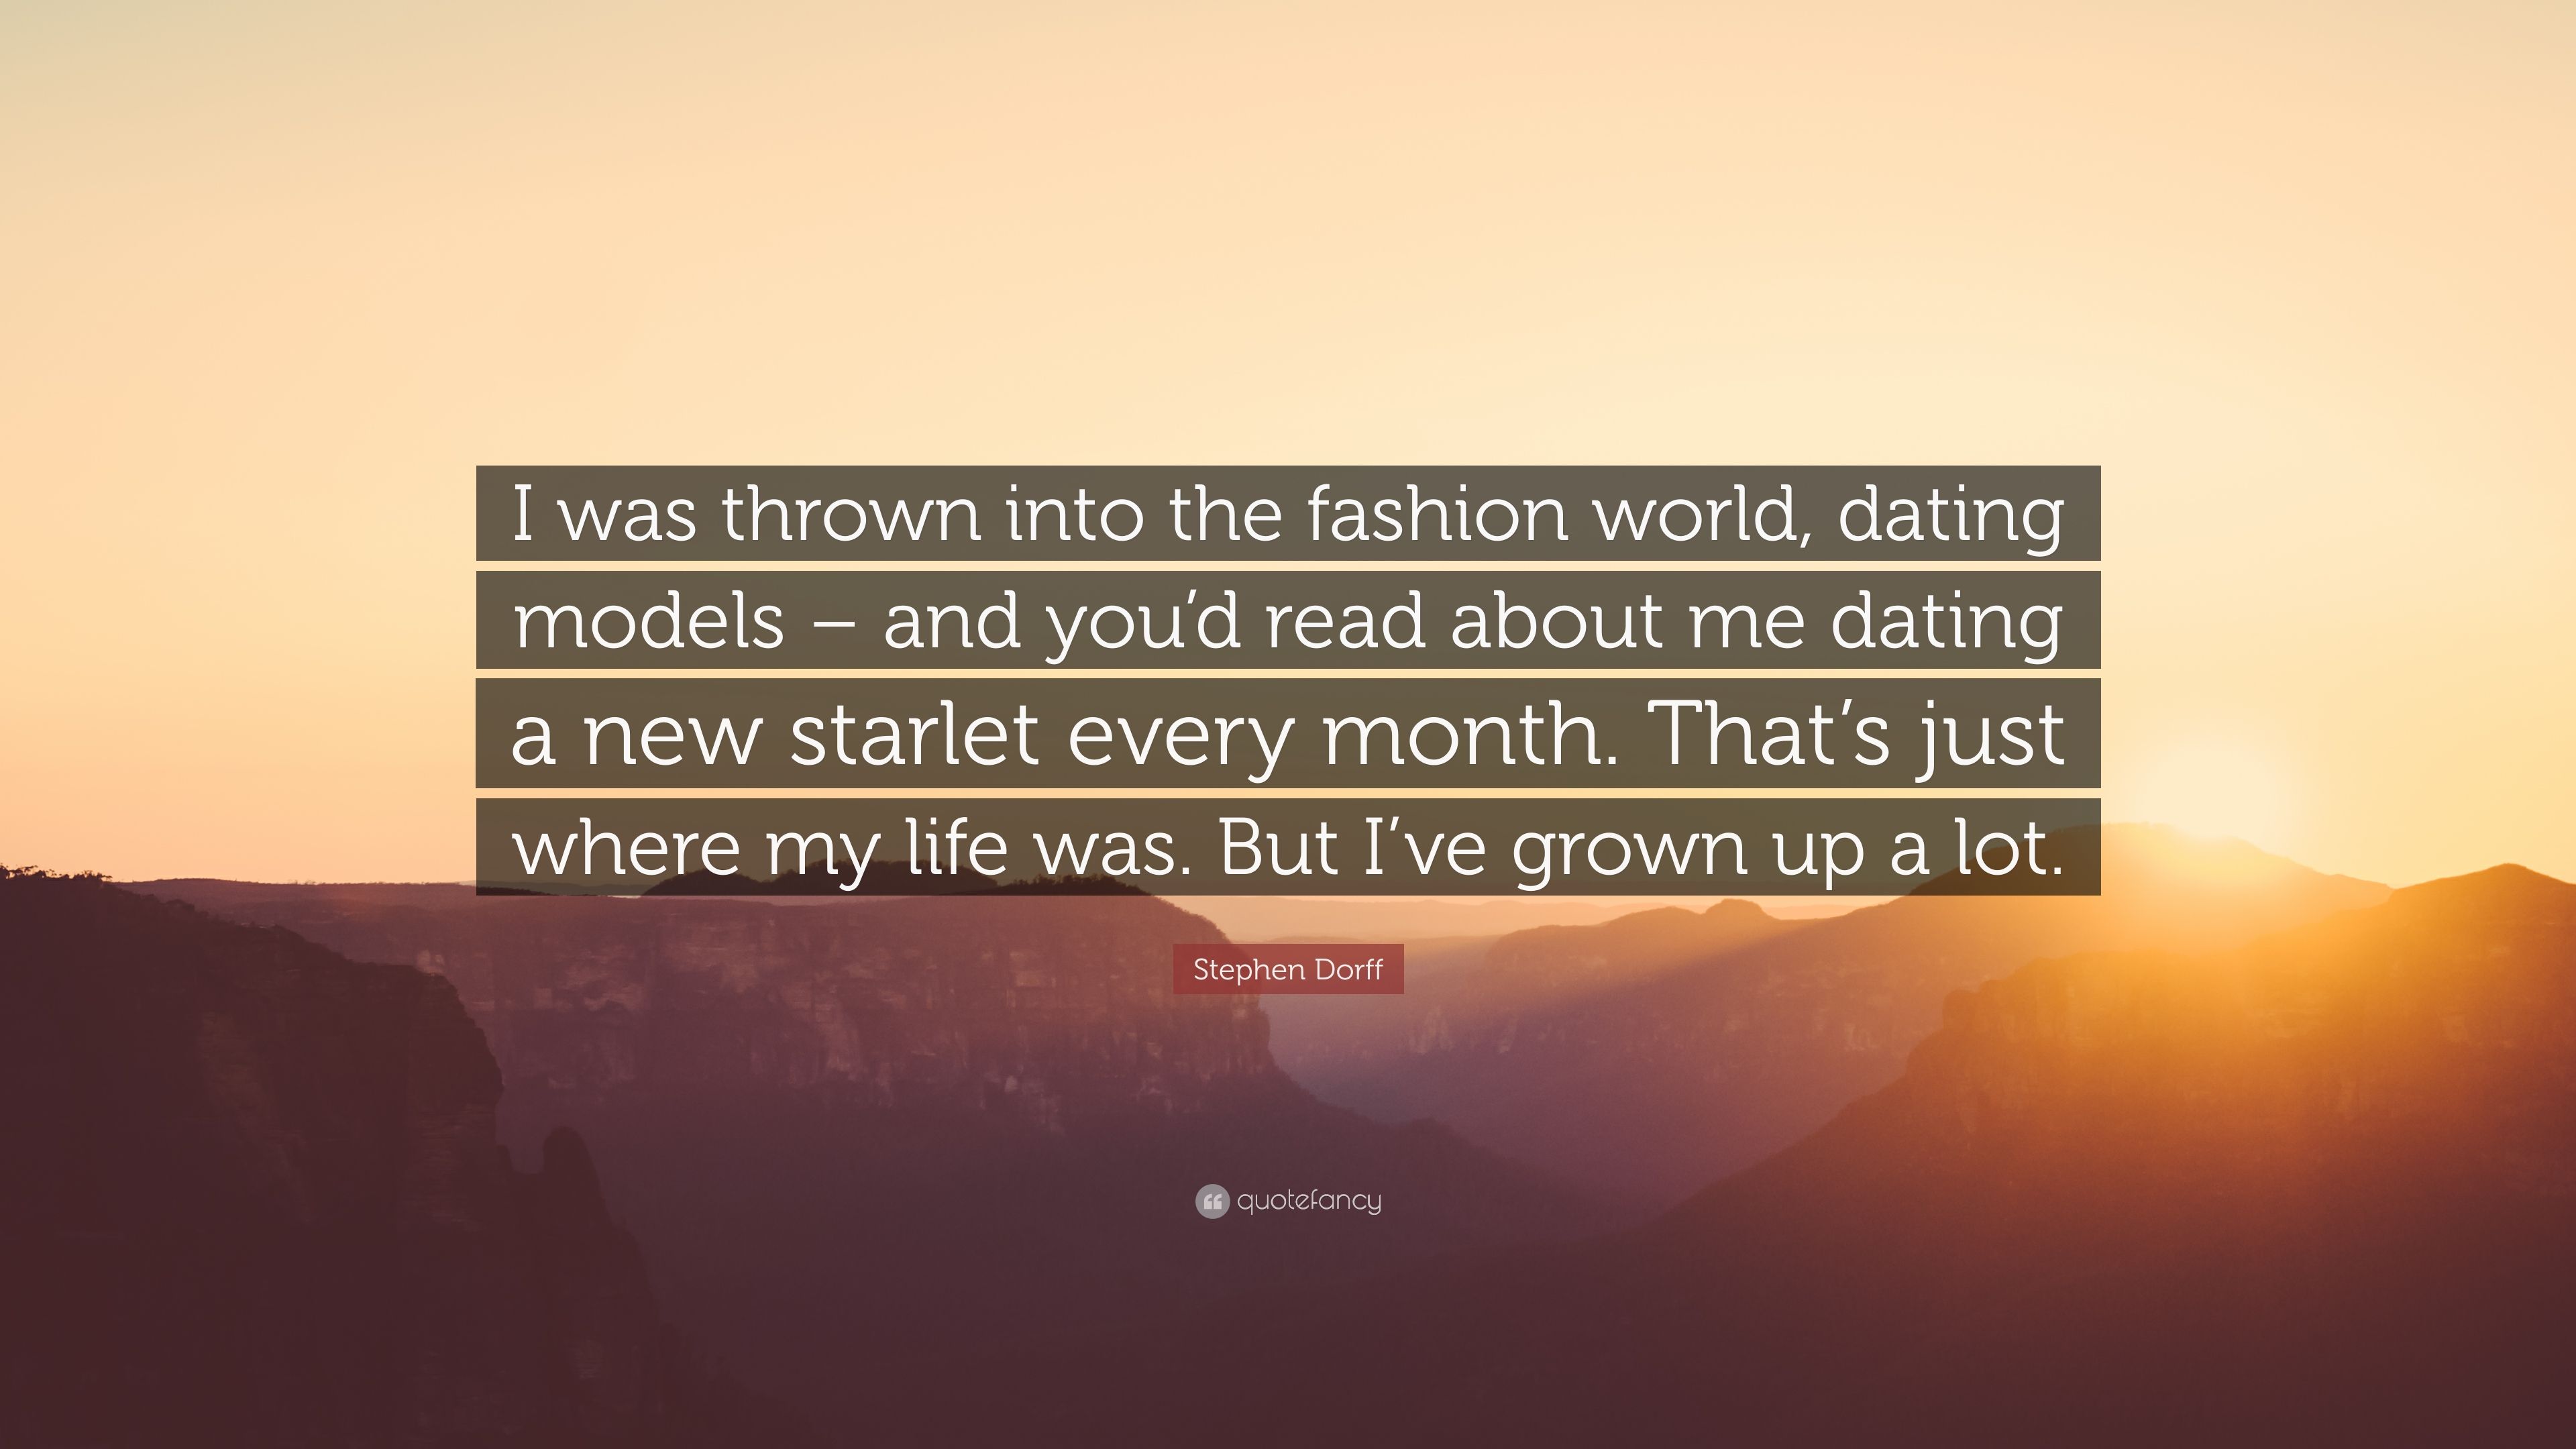 Stephen Dorff Quote: “I was thrown into the fashion world, dating